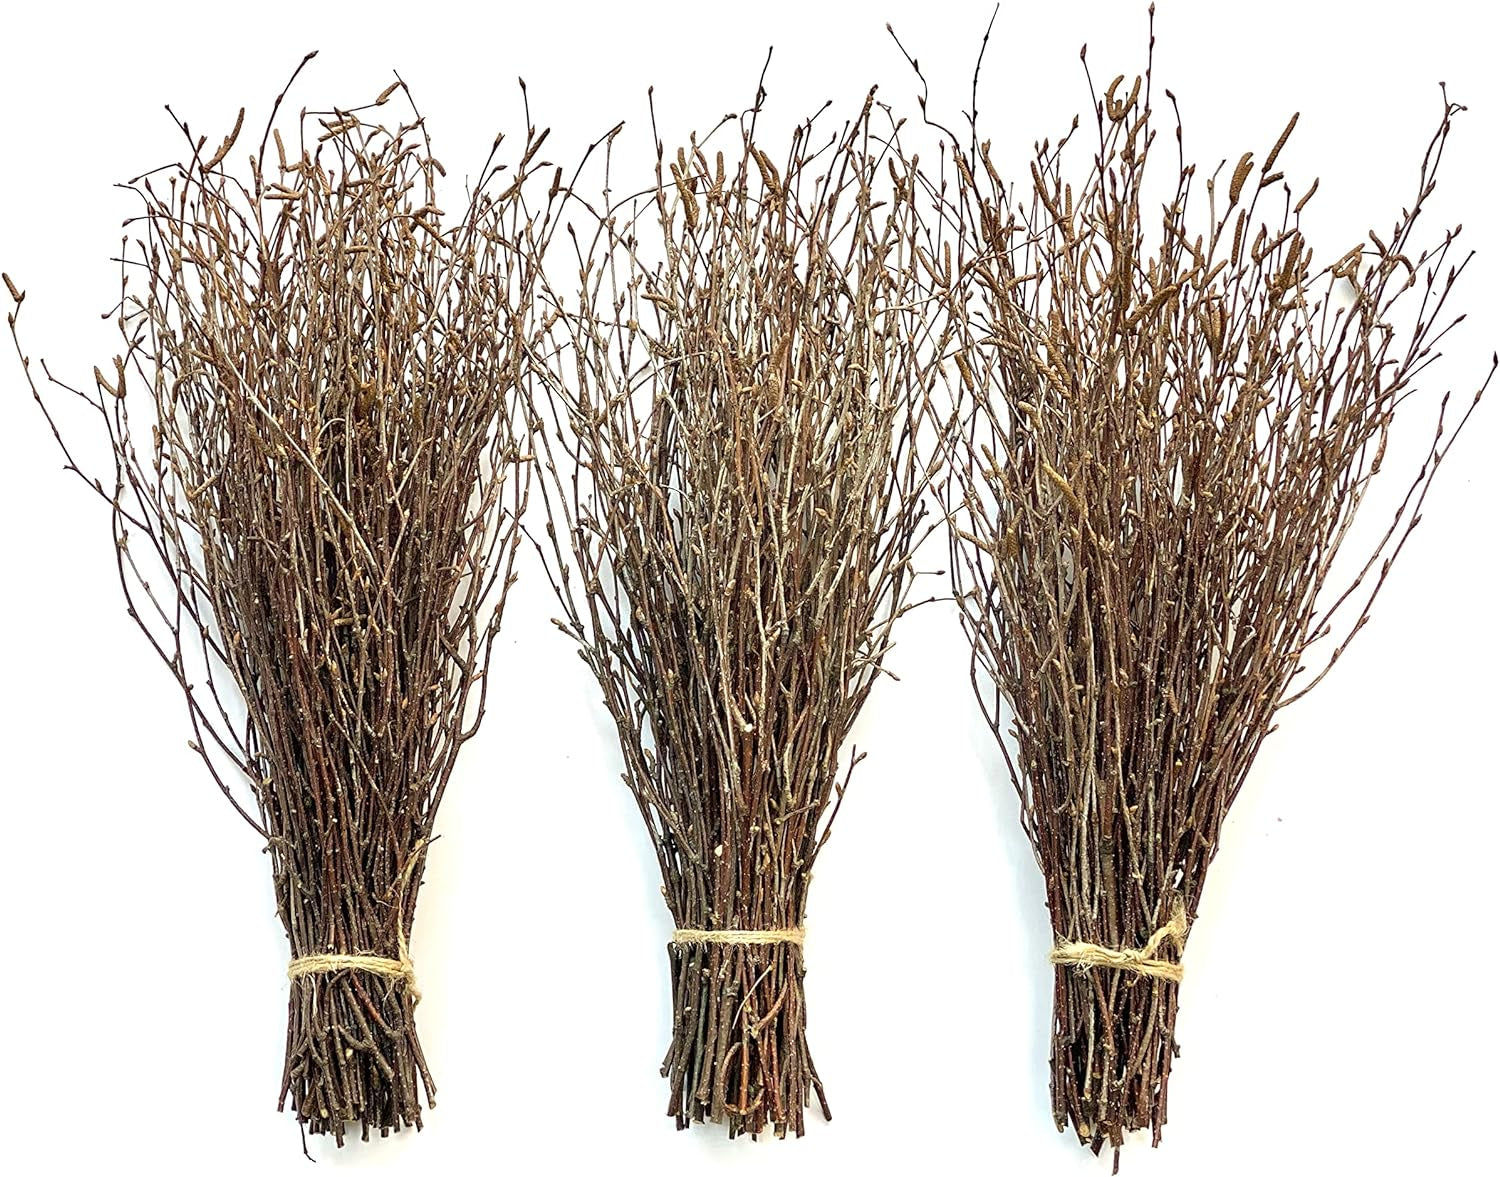 50 Psc. Birch Twigs – 100% Natural Decorative Birch Branches for Vases, Centerpieces & DIY Crafts – Birch Sticks for Decorating (16-18 Inch)